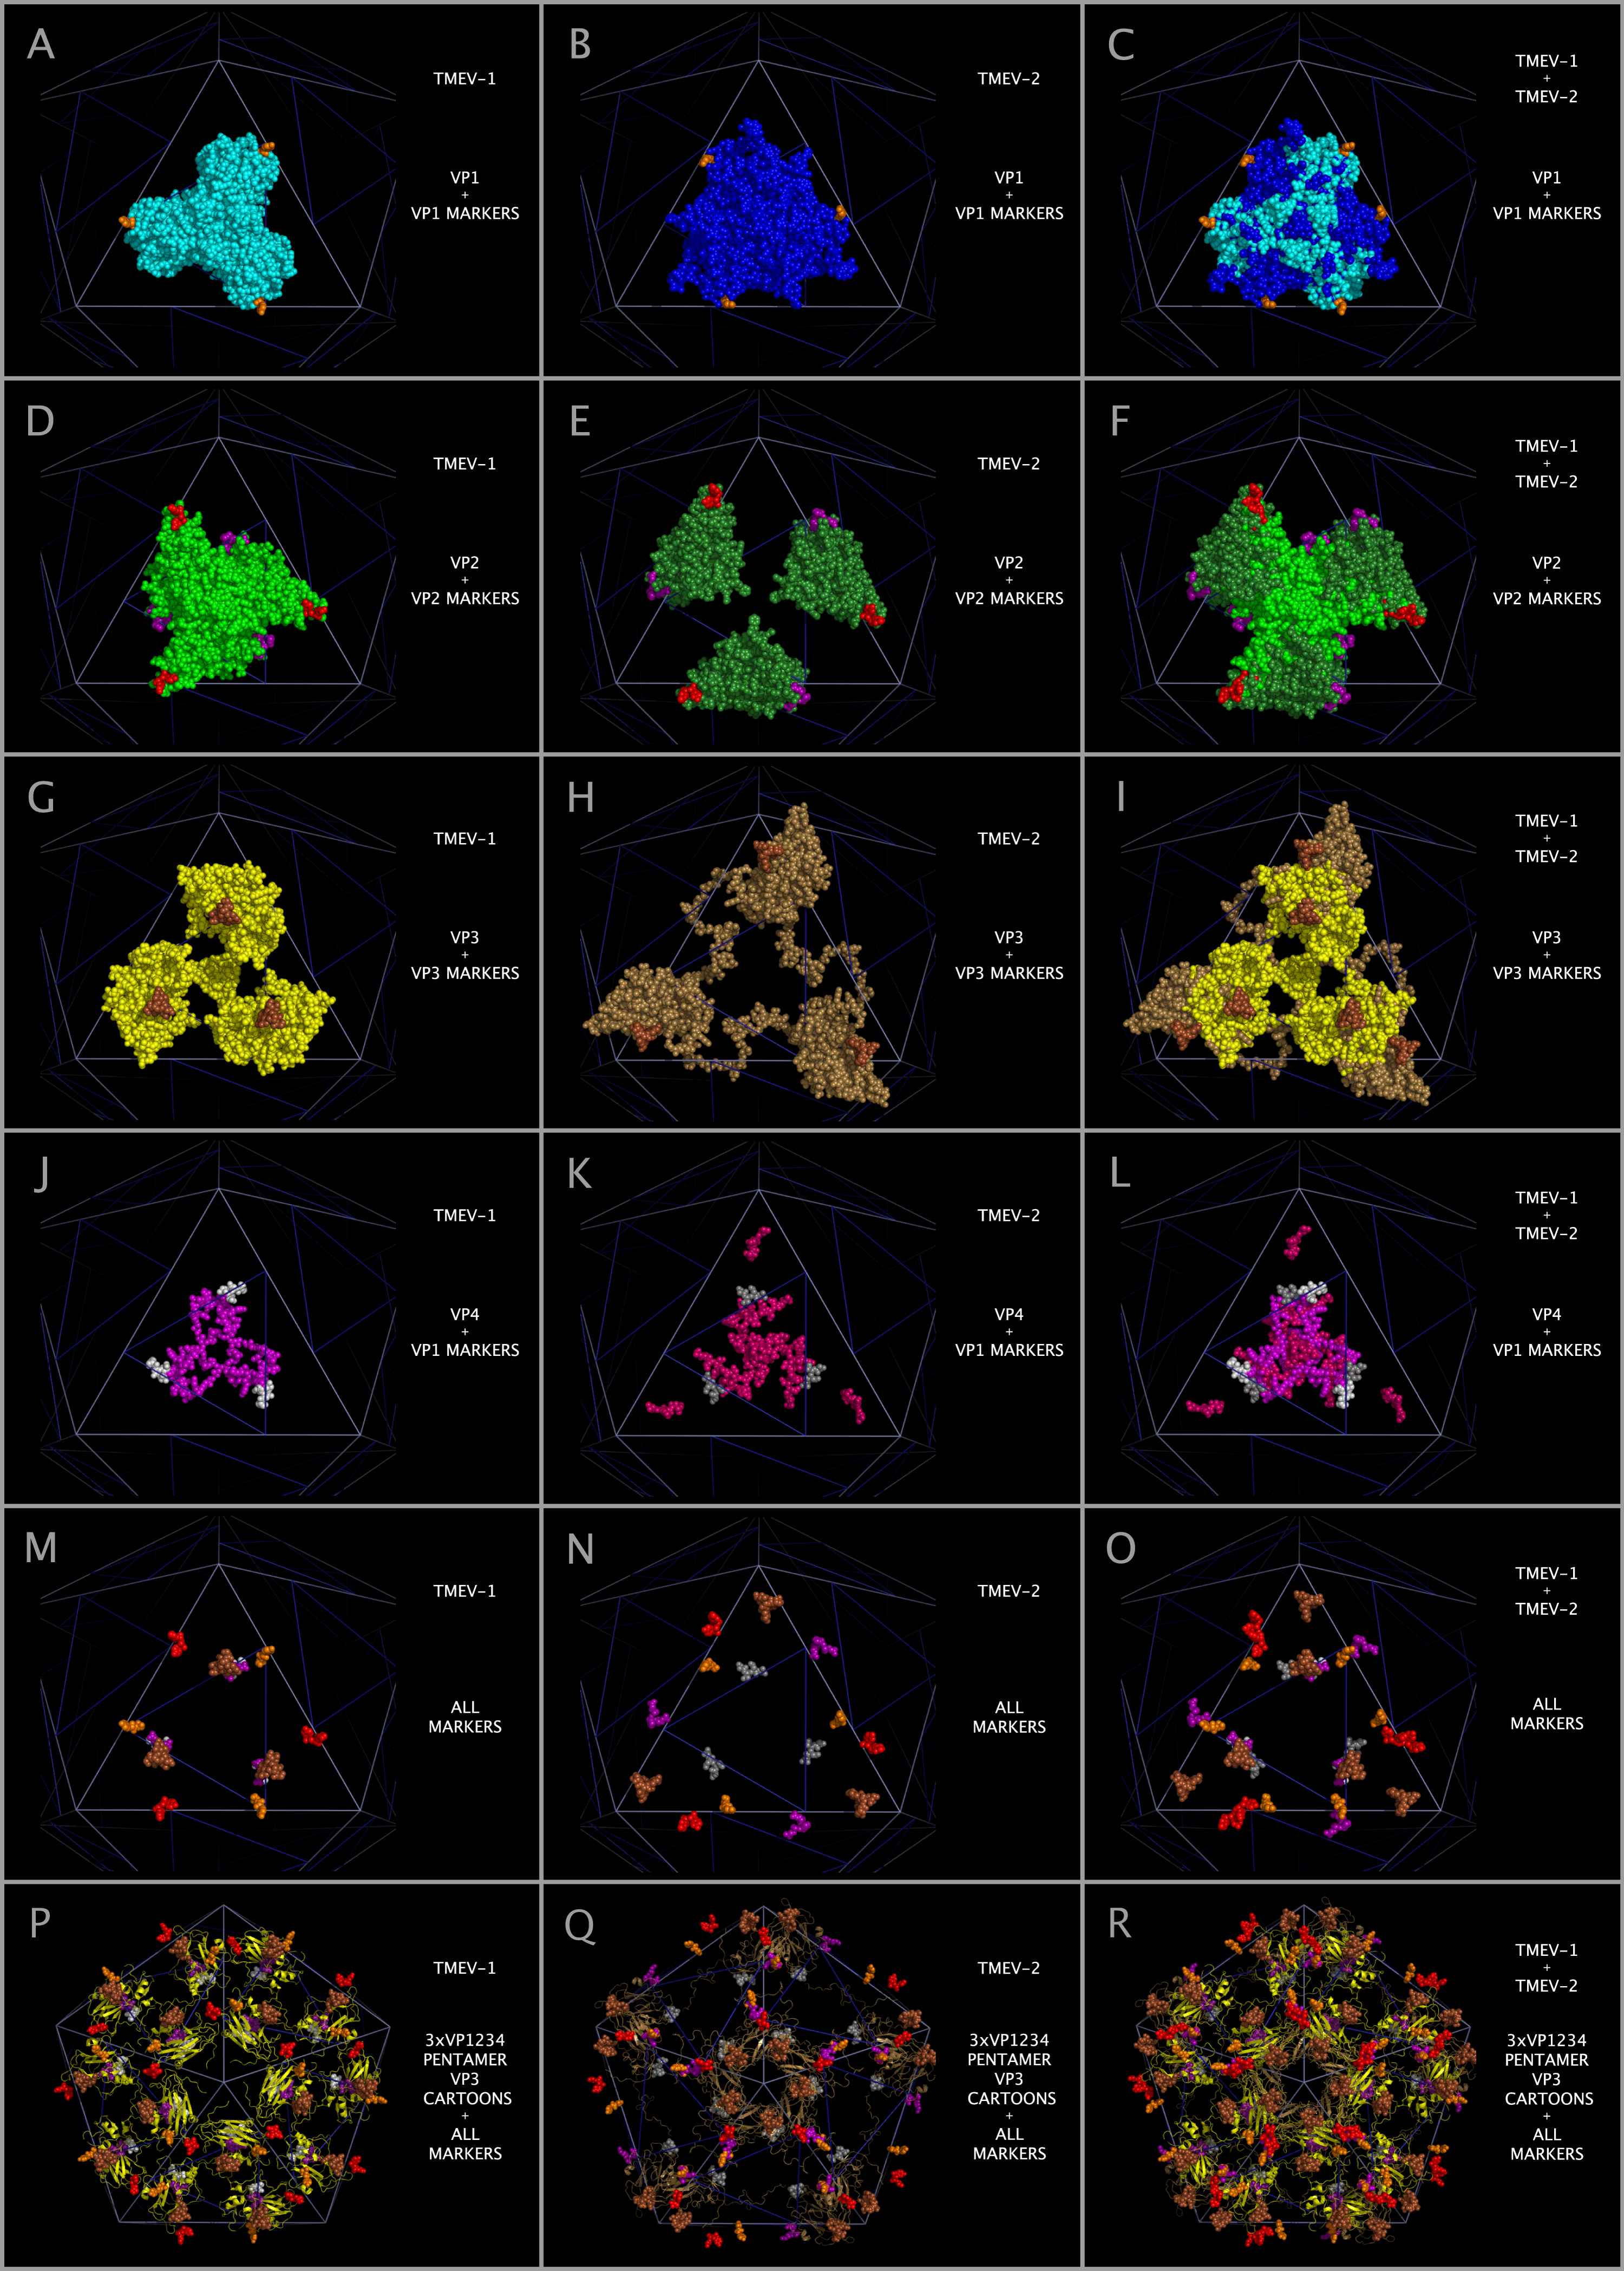 Differences in the spatial position of markers in constructed TMEV capsid tiling pieces and capsids